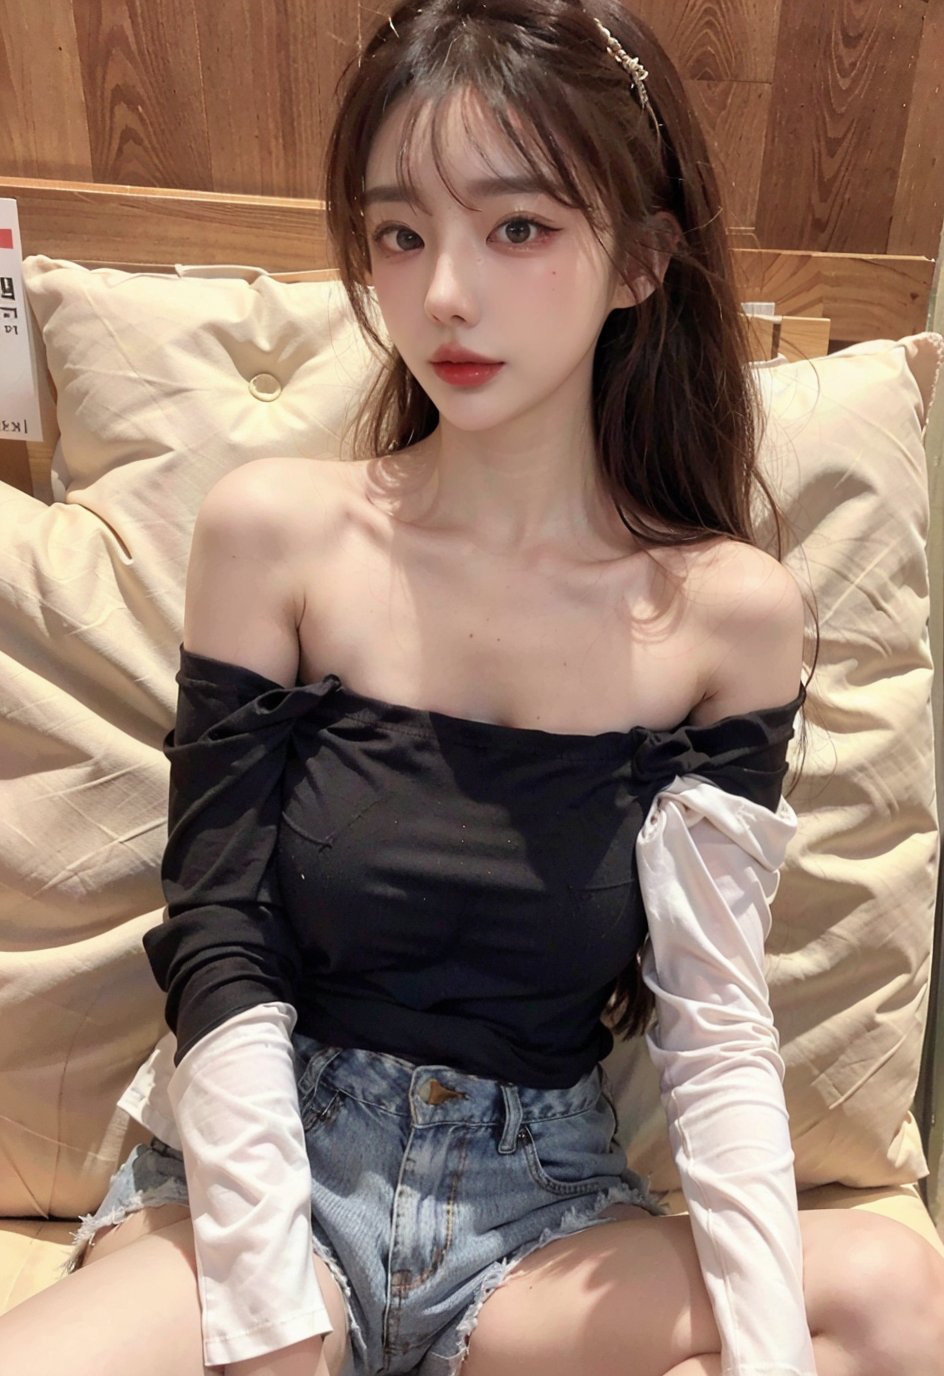 (Korean women), middle-aged women are tall and have enviable breasts. She has long, wavy brown hair, and her hair looks shiny and healthy.,1girl,{{{{{full-body}}}}},  ,(Full body),(Single photo),(Front view),1 girl, In the photo taken with a high-definition camera, she appears in a long shot. Her skin maintains a smooth and even skin tone with a white skin tone, ((Looking at viewer)), Casual, ((Cream long-sleeved compression offshoulder tee, jean shorts: 1.3)), Standing with legs apart. She is depicted in various poses while wearing luxurious jewellery. Her eyes are bright and vibrant, and her smiling face shows happiness and confidence. The appearance of the middle-aged woman depicted in this way is realistic and detailed, with beauty and elegance emphasized,Jessy